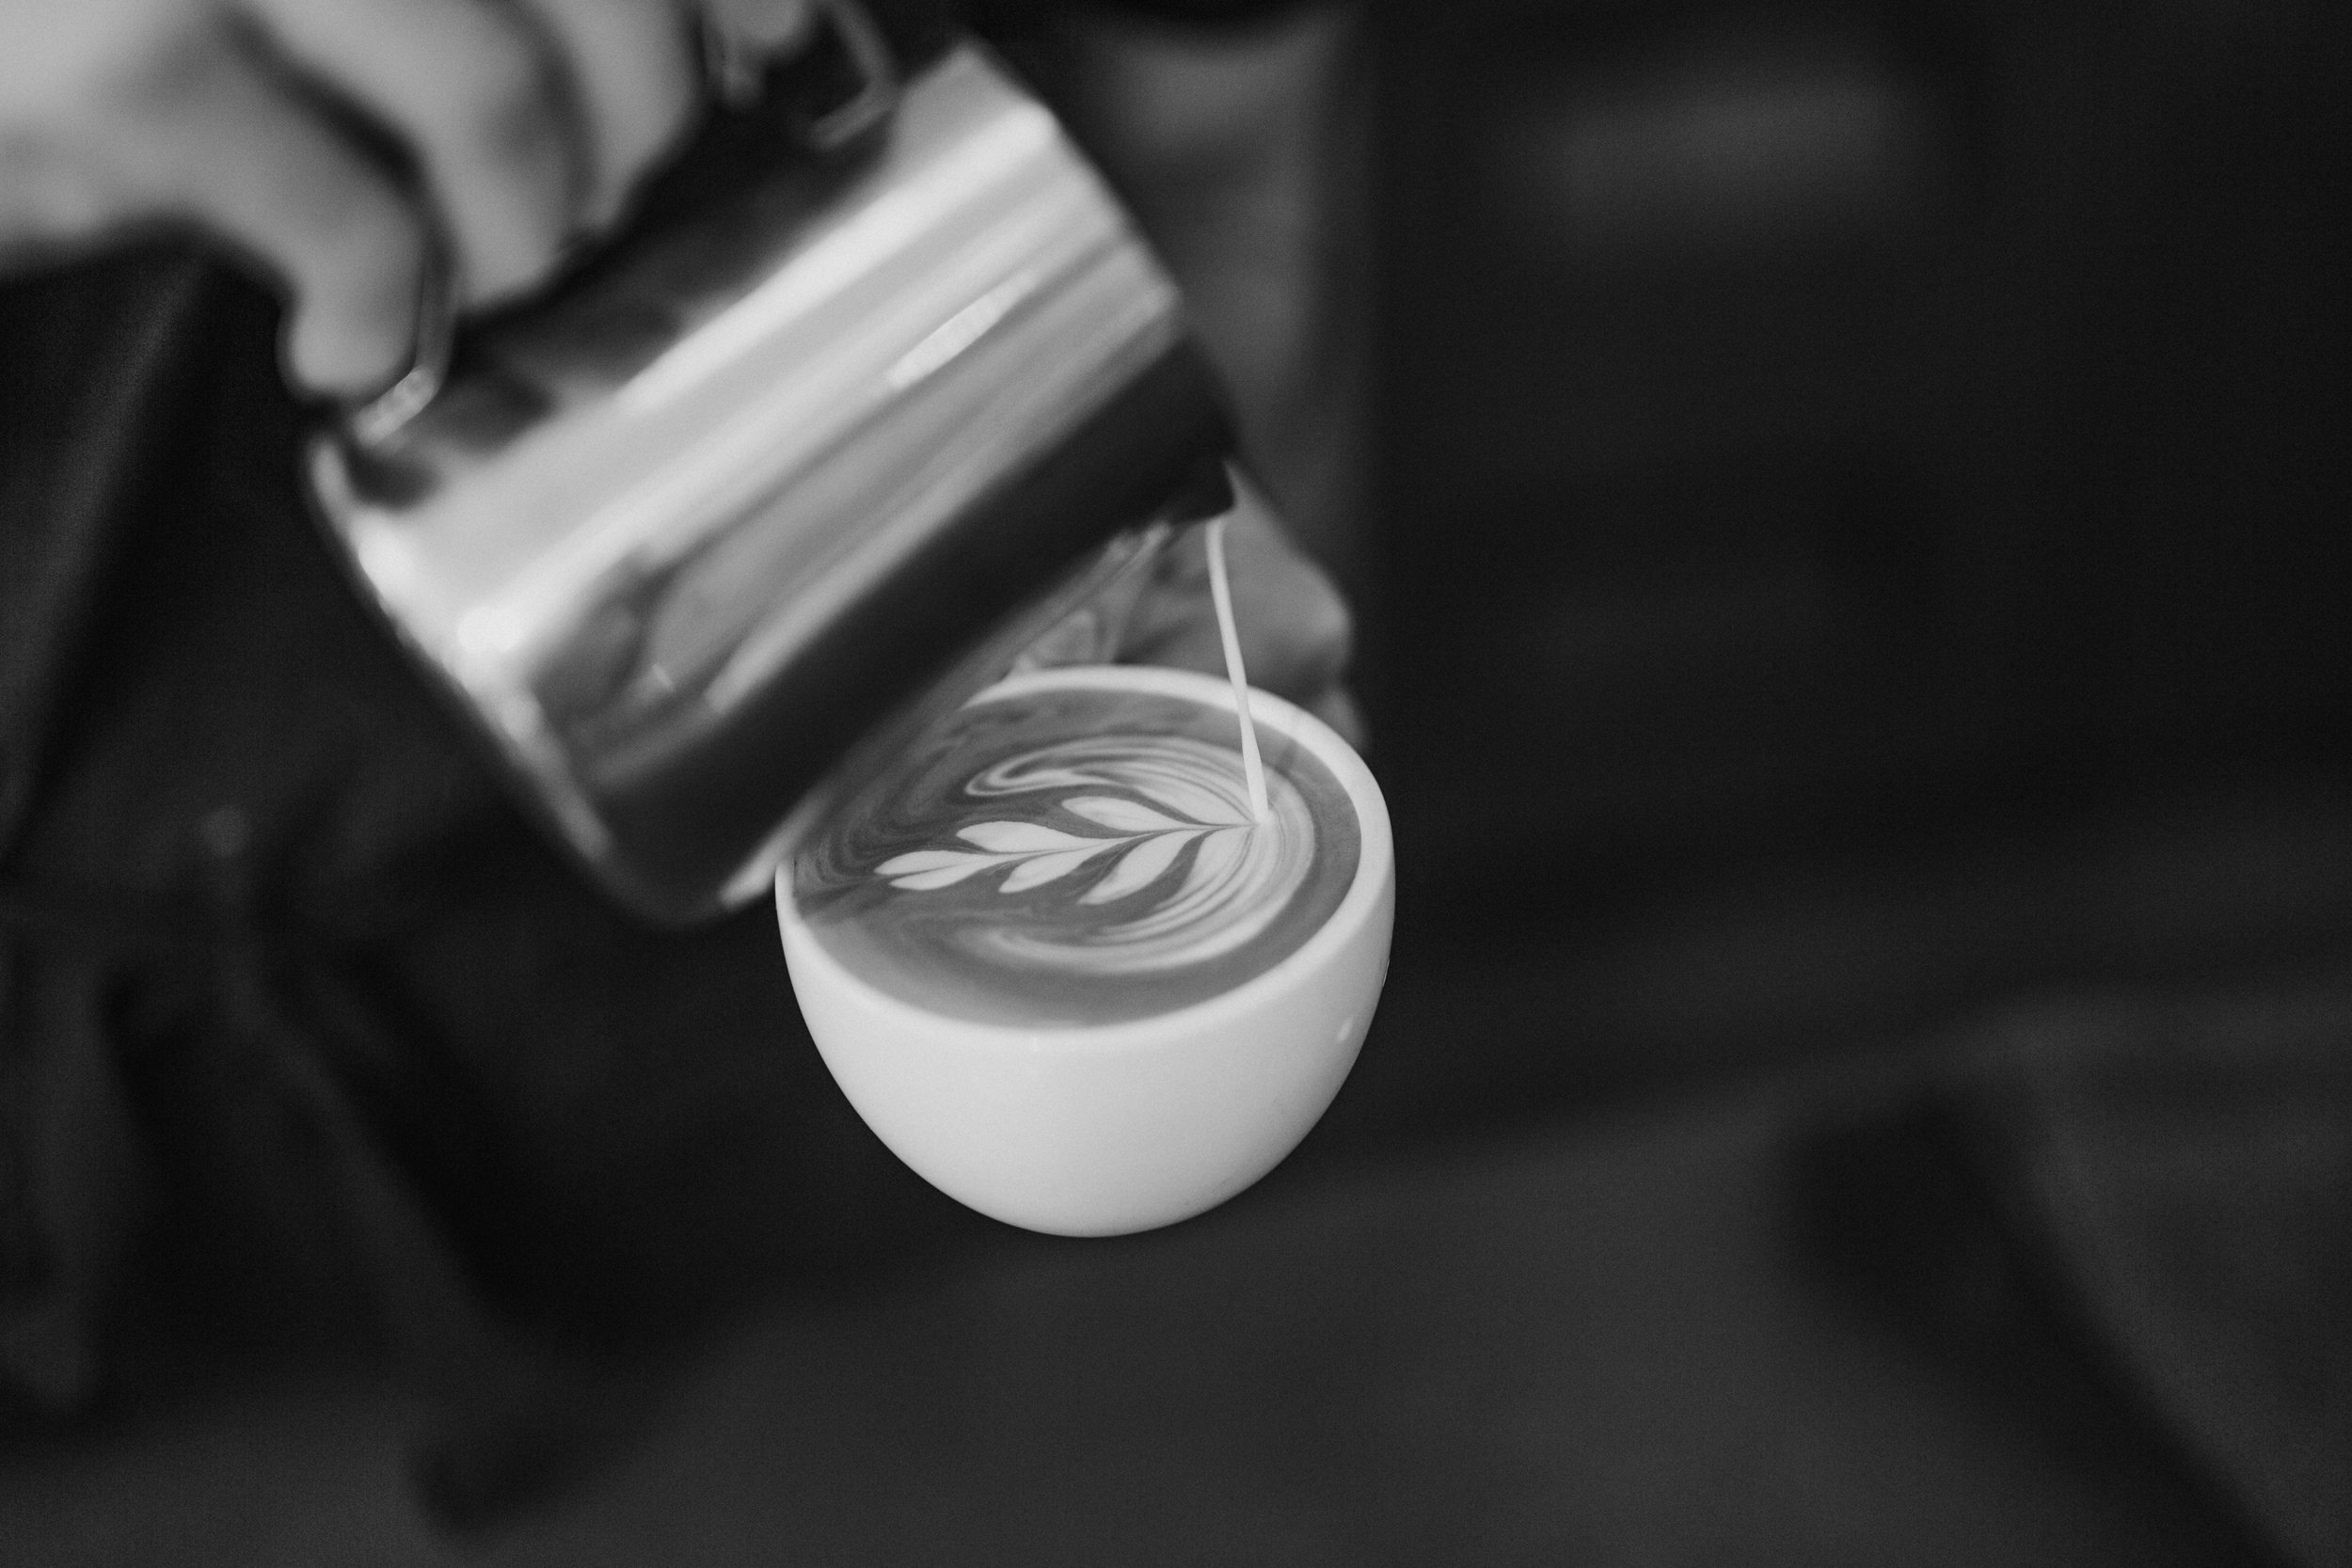 A latte being poured